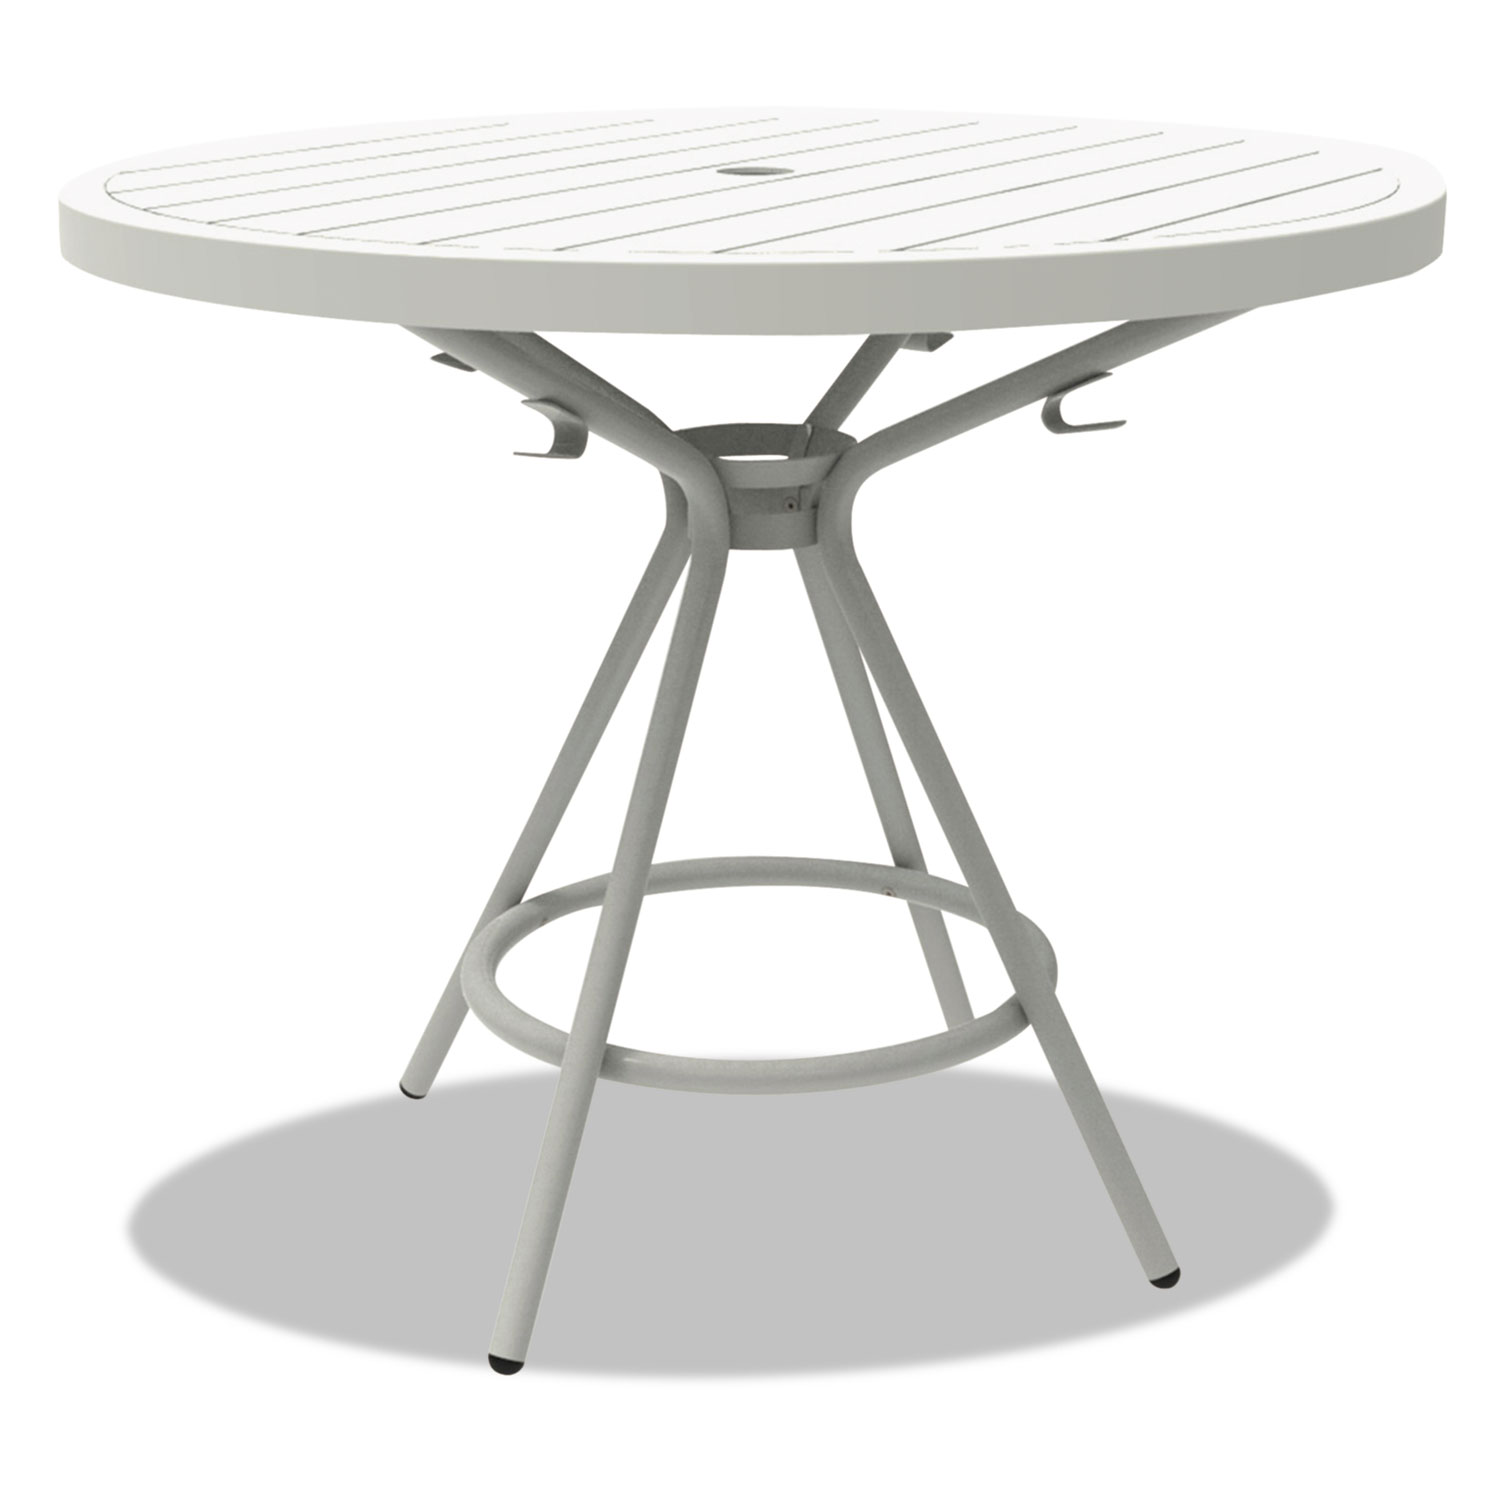  Safco 4361WH CoGo Tables, Steel, Round, 30 Diameter x 29 1/2 High, White (SAF4361WH) 